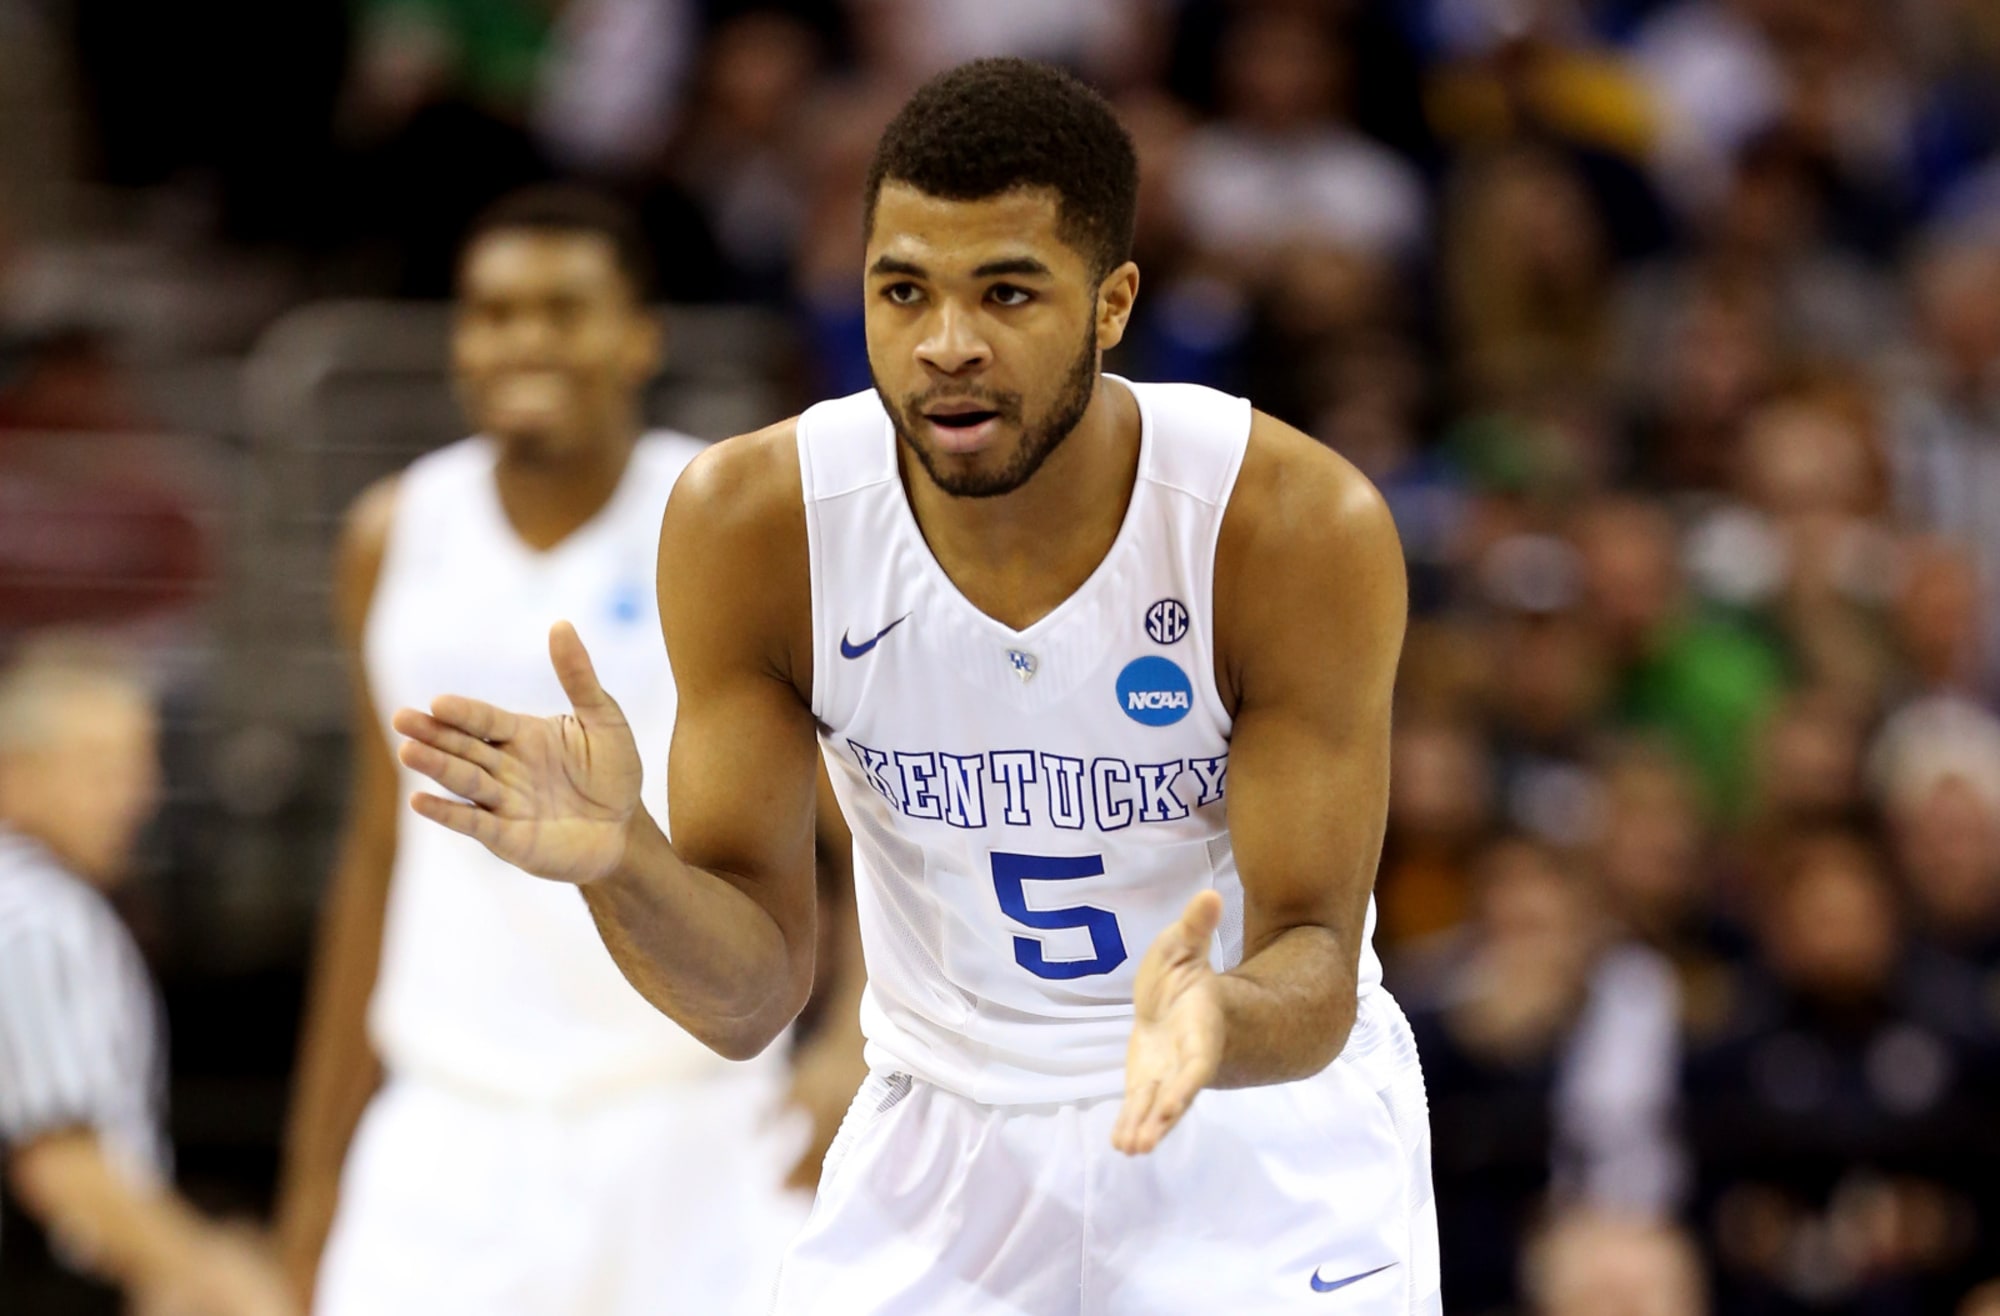 Kentucky Basketball: Looking back at the Wildcats career of Andrew Harrison